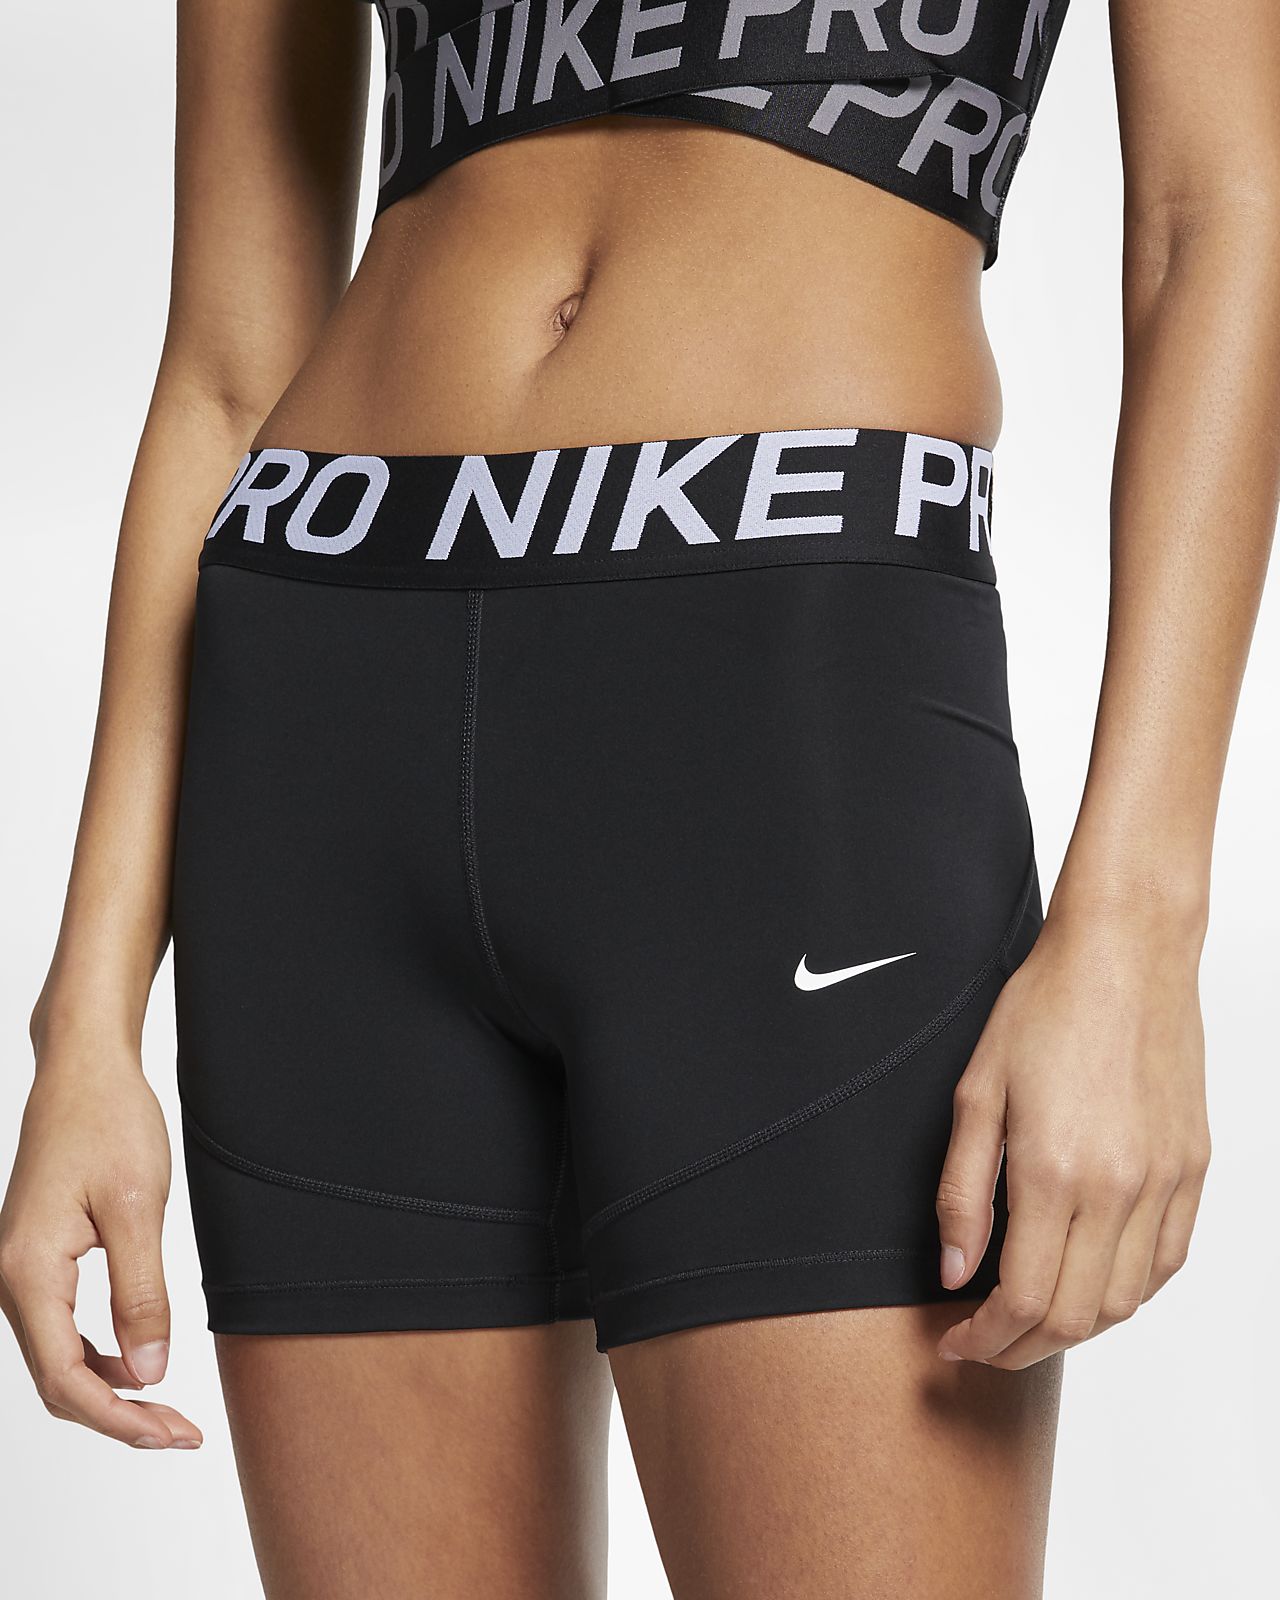 nike pro shorts and top